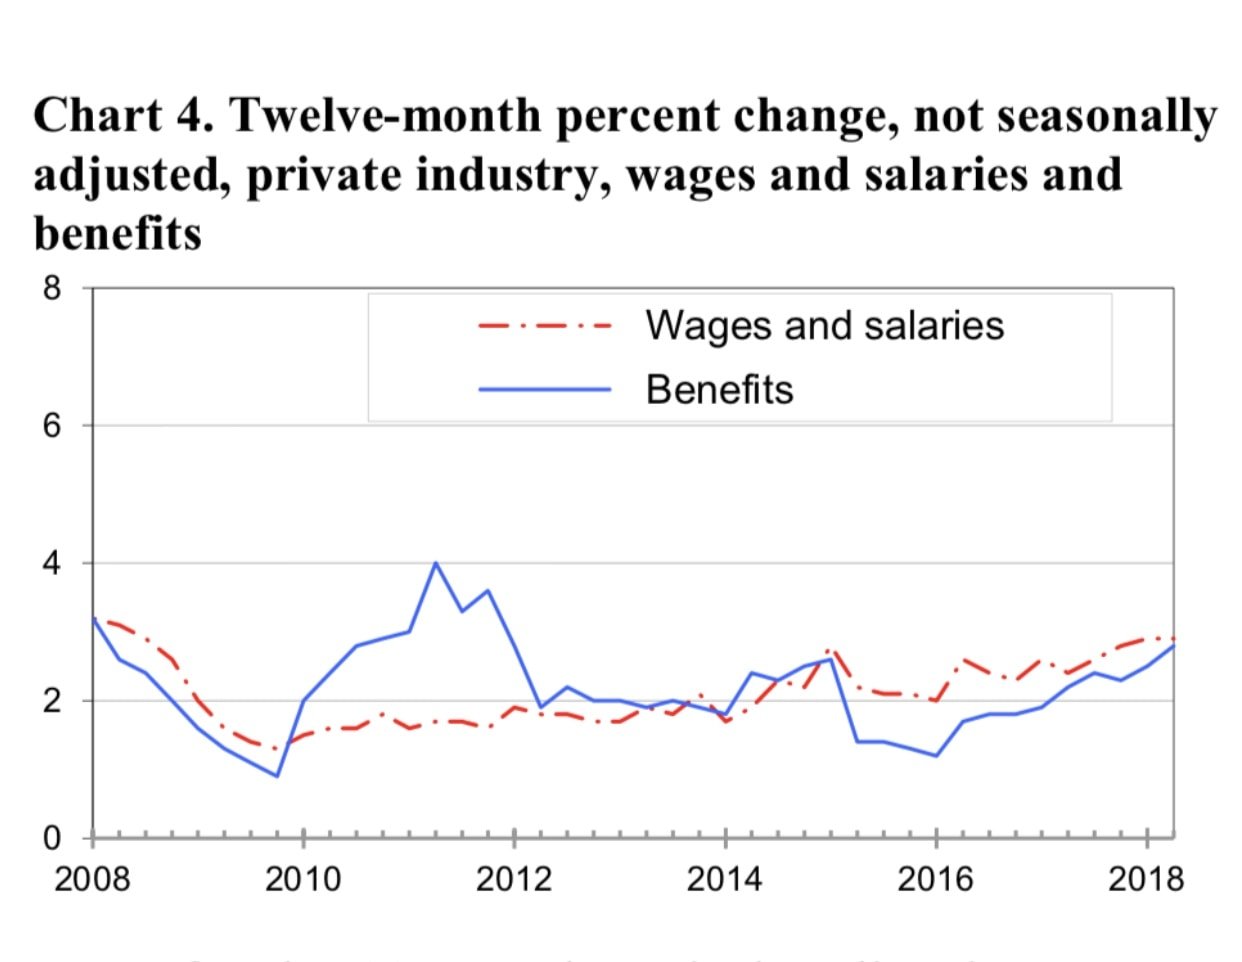 How Wages have increased in the Private Industry in the Last Year